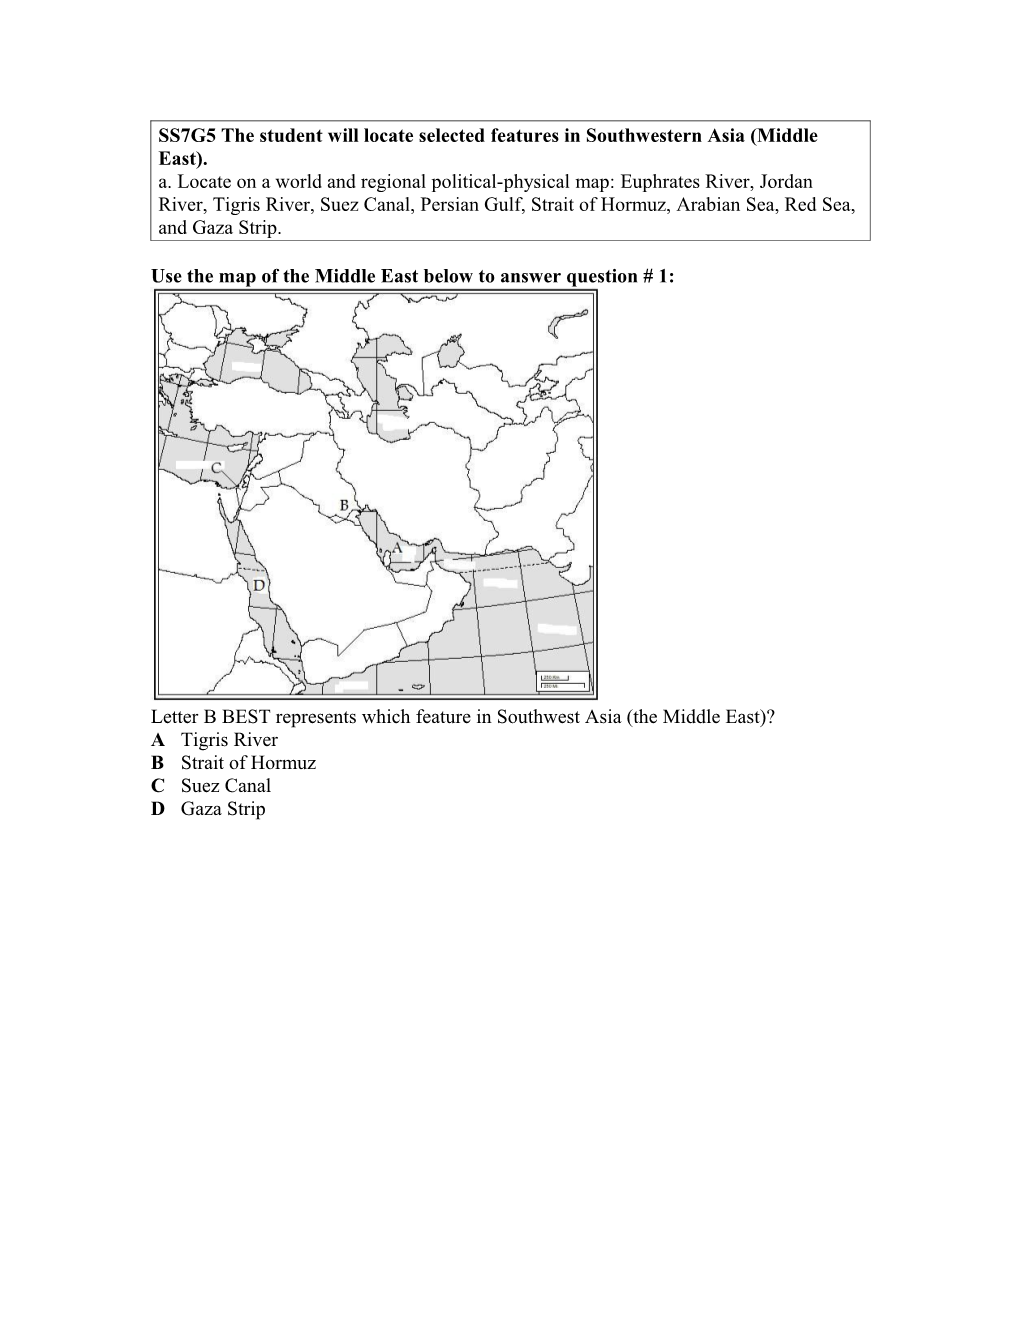 SS7G5 The Student Will Locate Selected Features In Southwestern Asia (Middle East)